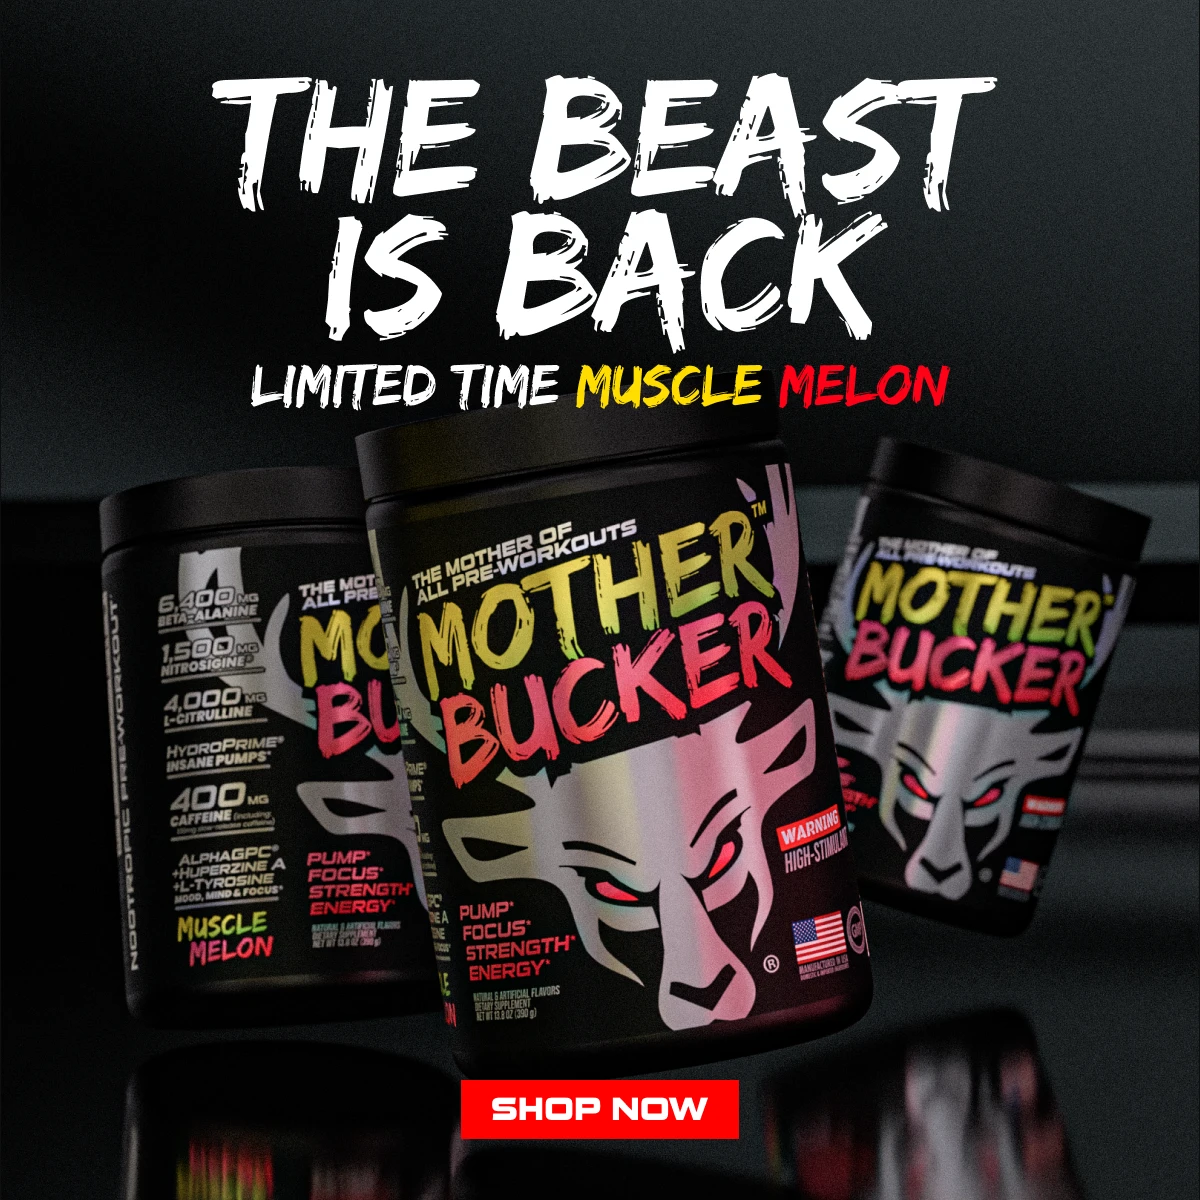 Mother Bucker Muscle Melon - Image of our new Mother Bucker Pre-Workout Flavor, Muscle Melon, with text that reads "the beast is back, limited time muscle melon" and a button that reads "shop now".  In the image, Mother Bucker is flank